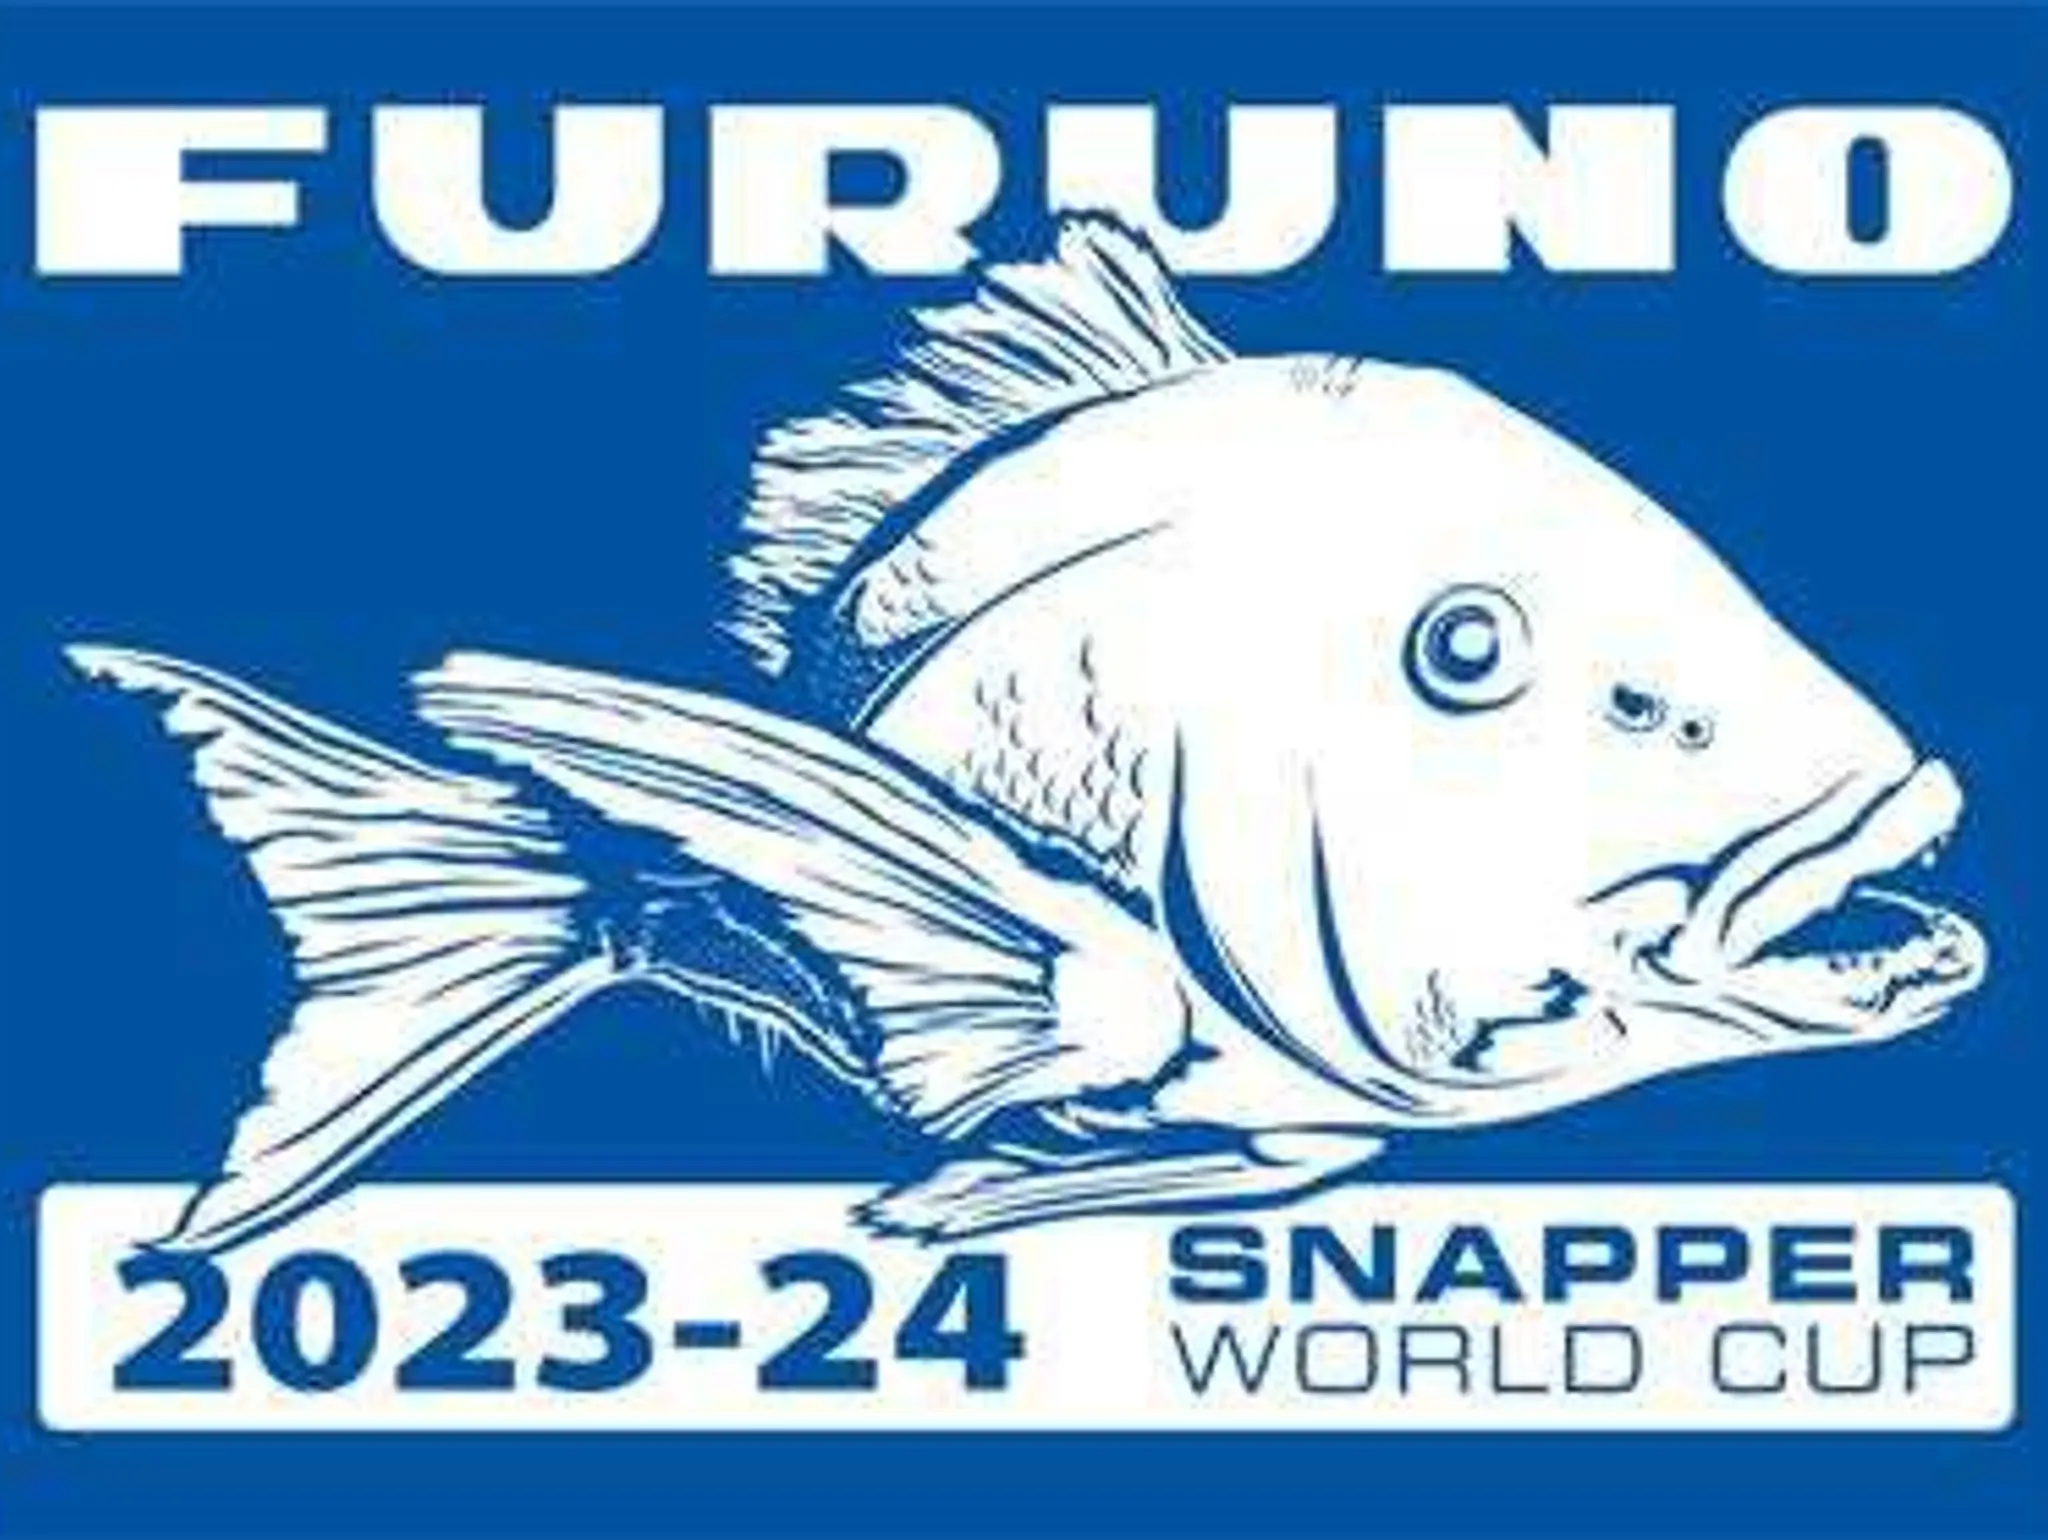 FURUNO SNAPPER WORLD CUP